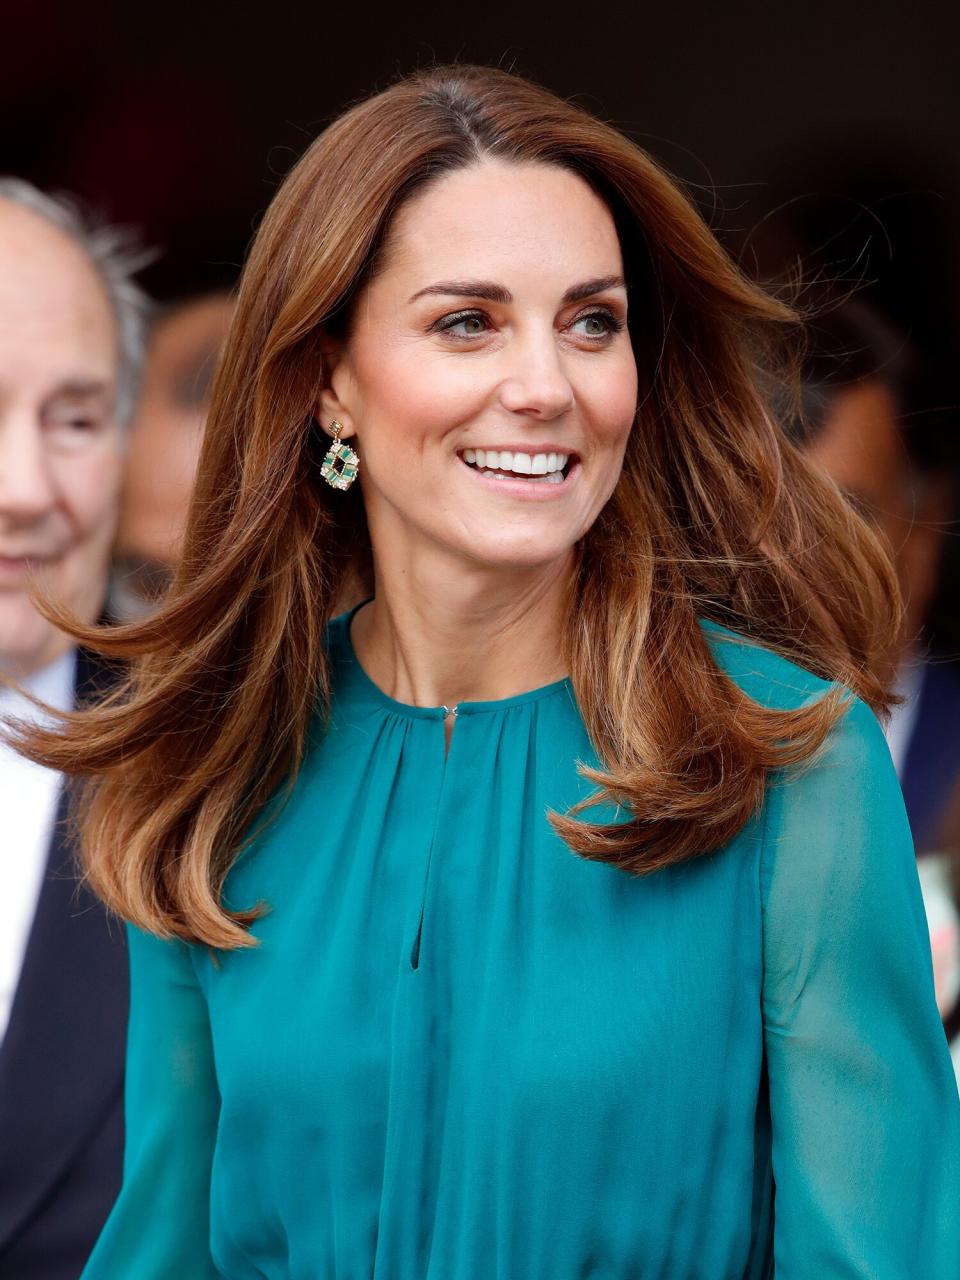 Catherine, Duchess of Cambridge visits the Aga Khan Centre on October 2, 2019 in London, England. The visit is ahead of her and Prince William's Royal Tour to Pakistan